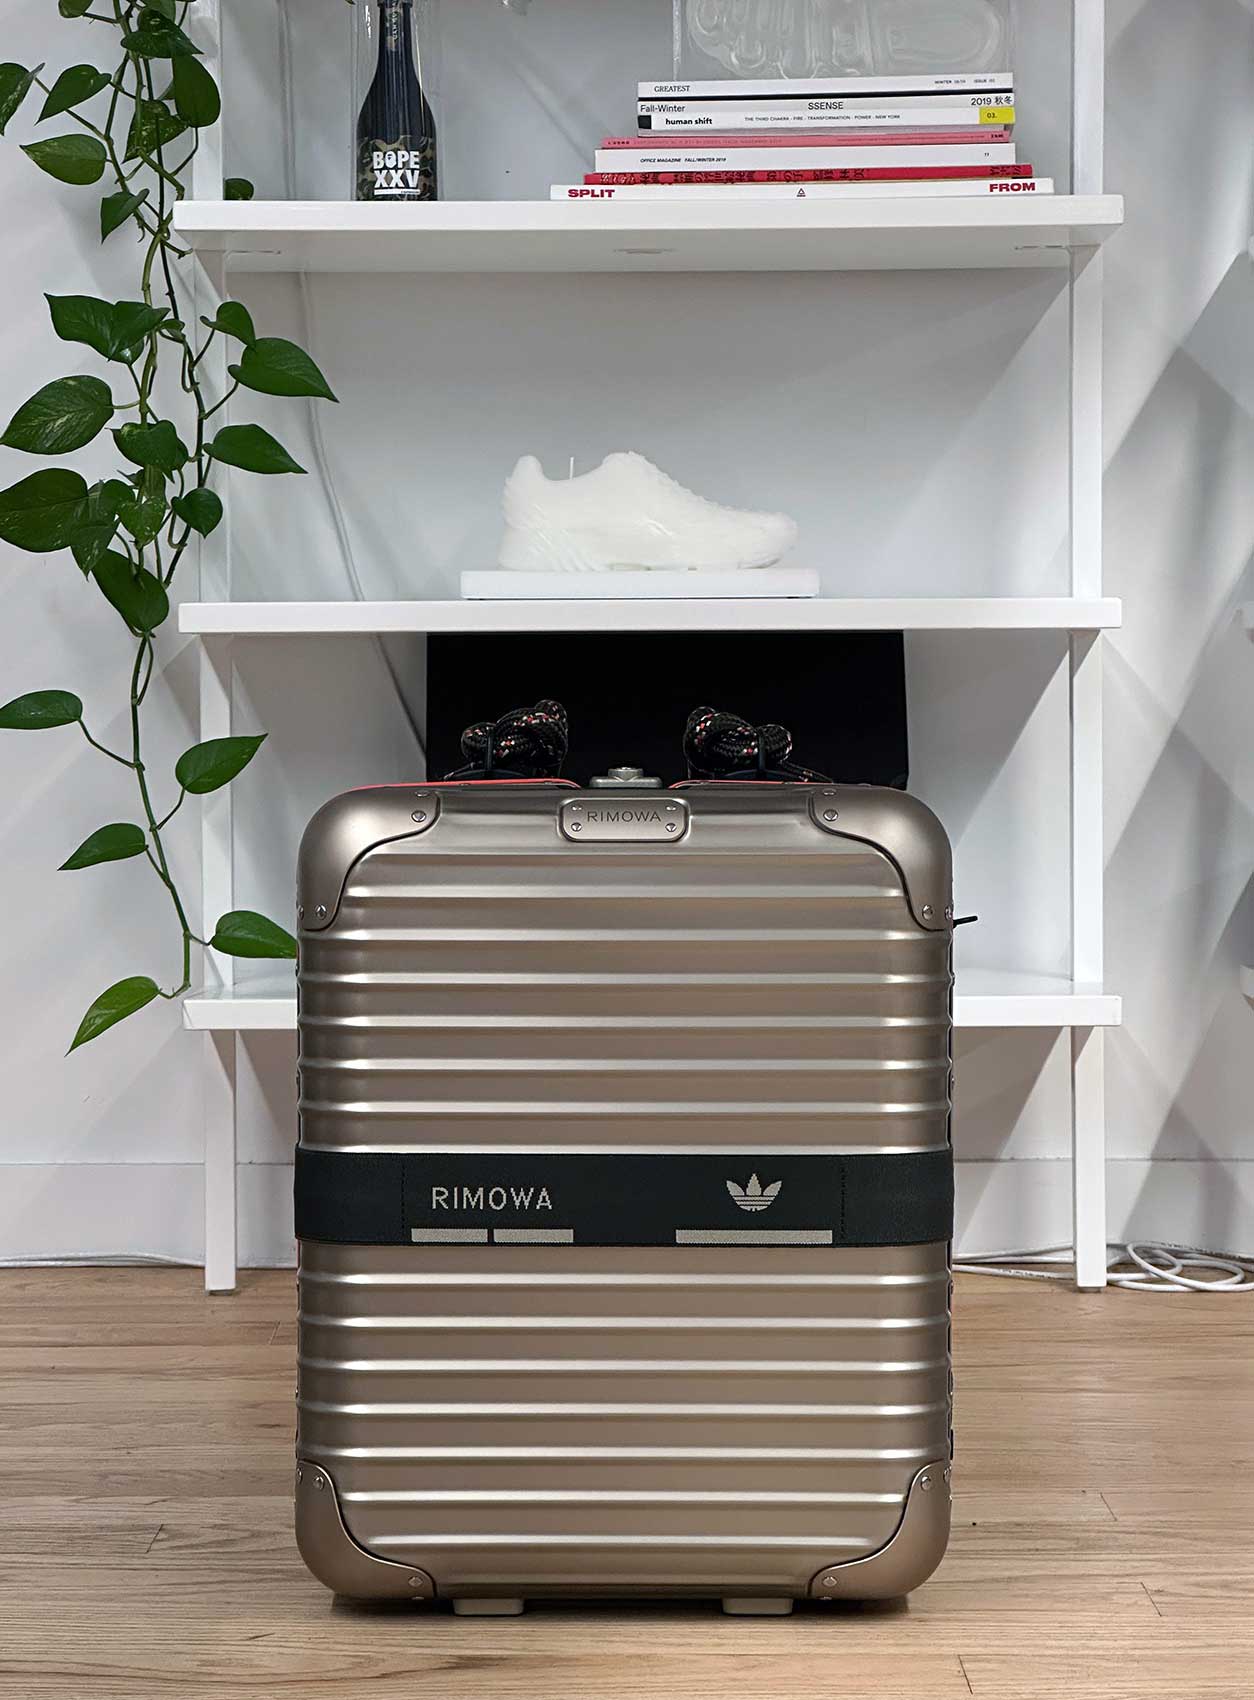 RIMOWA, adidas NMD S1 Sneaker, Backpack Case: Release Date, Price